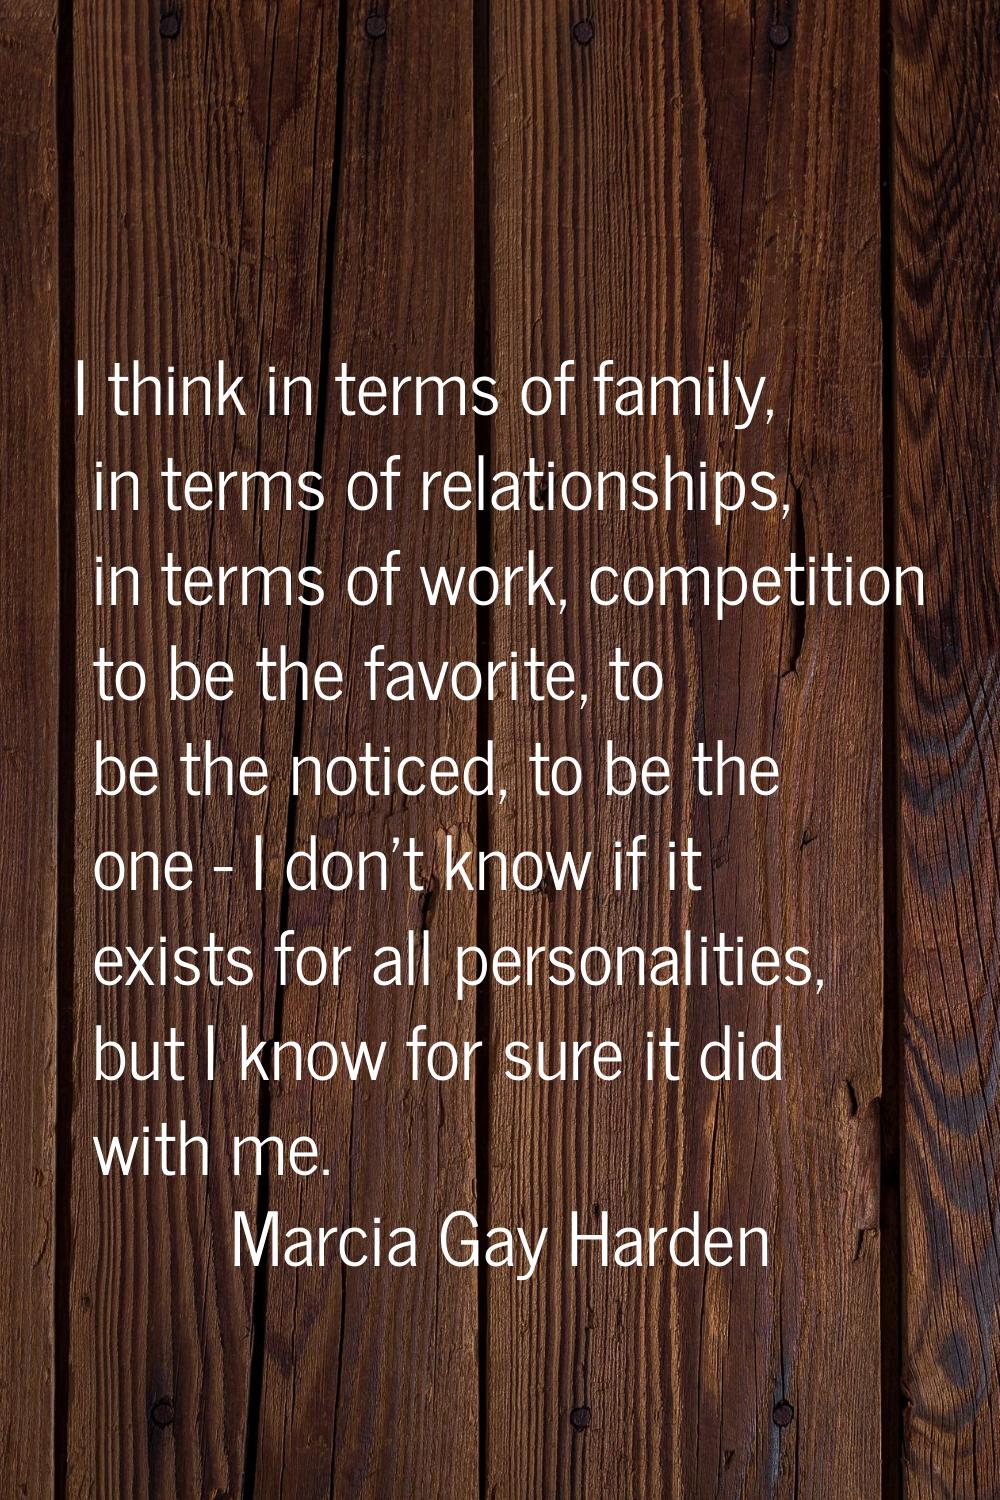 I think in terms of family, in terms of relationships, in terms of work, competition to be the favo